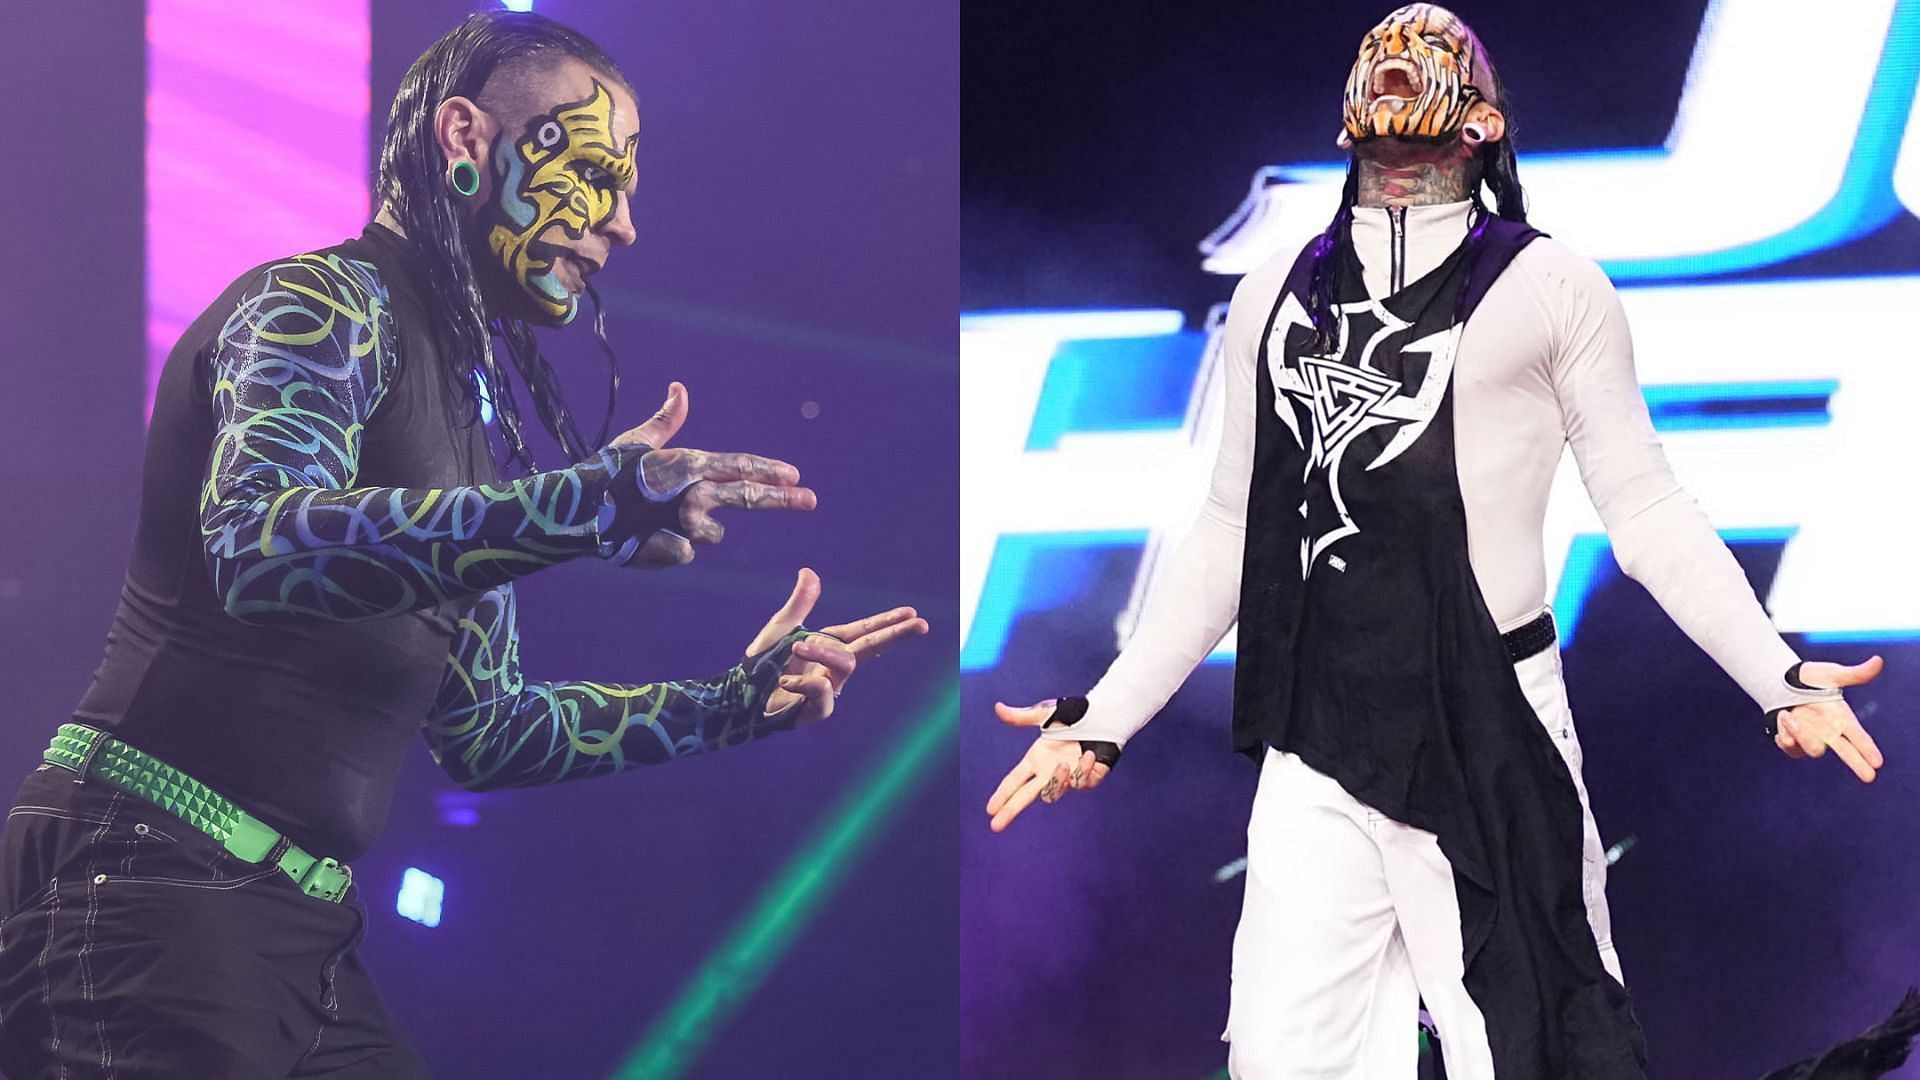 Jeff Hardy is a former World Heavyweight Champion who is now with AEW